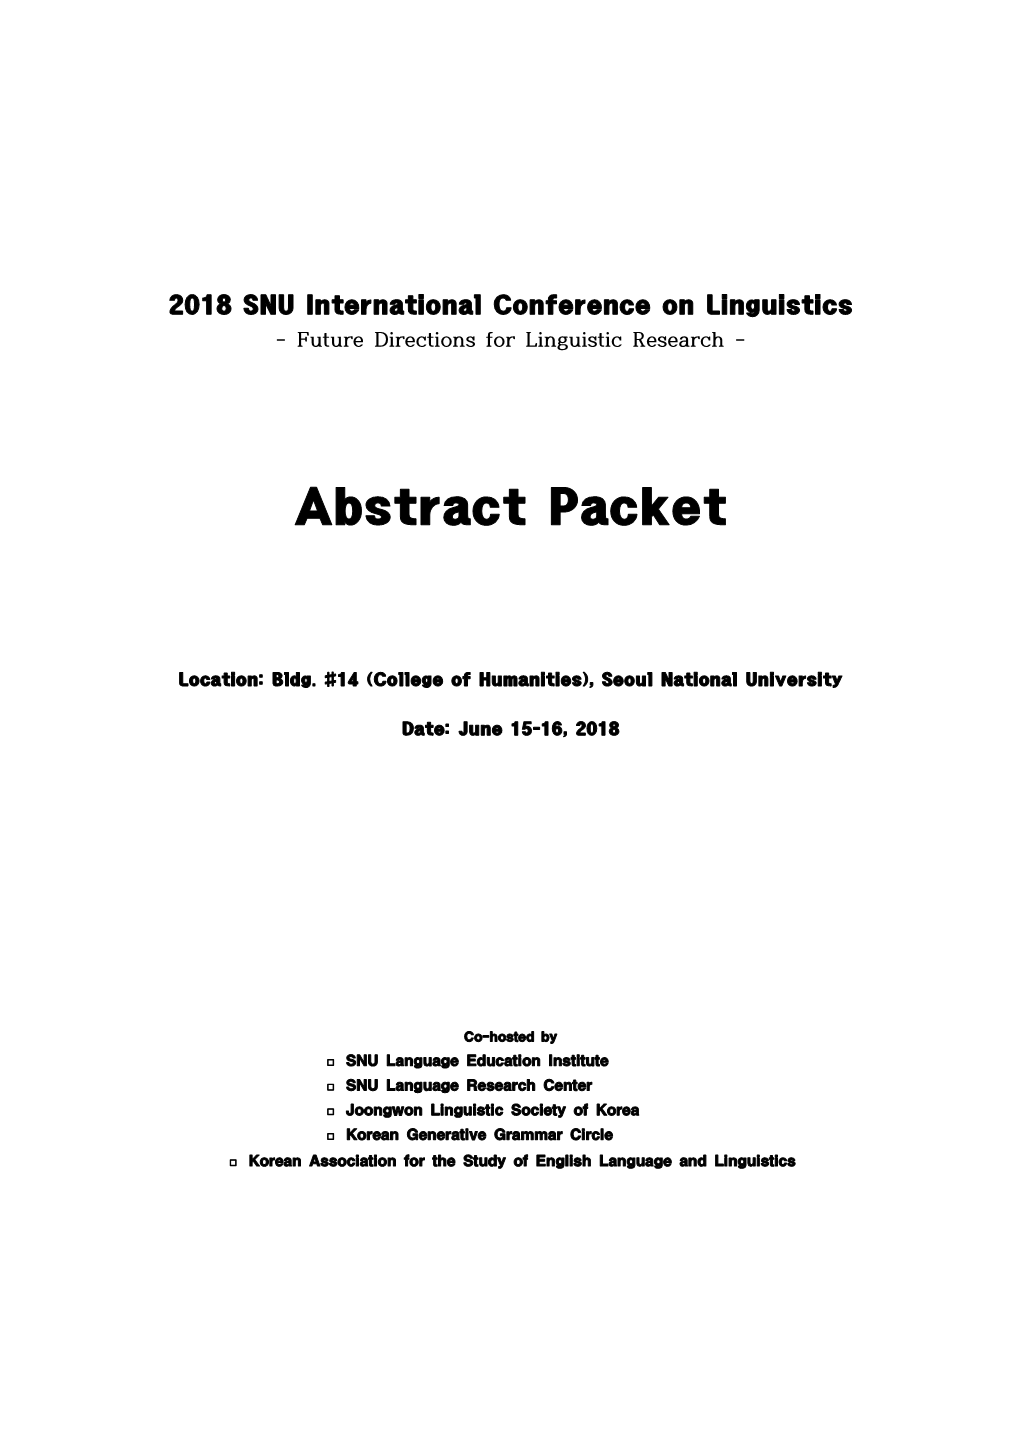 Abstract Packet